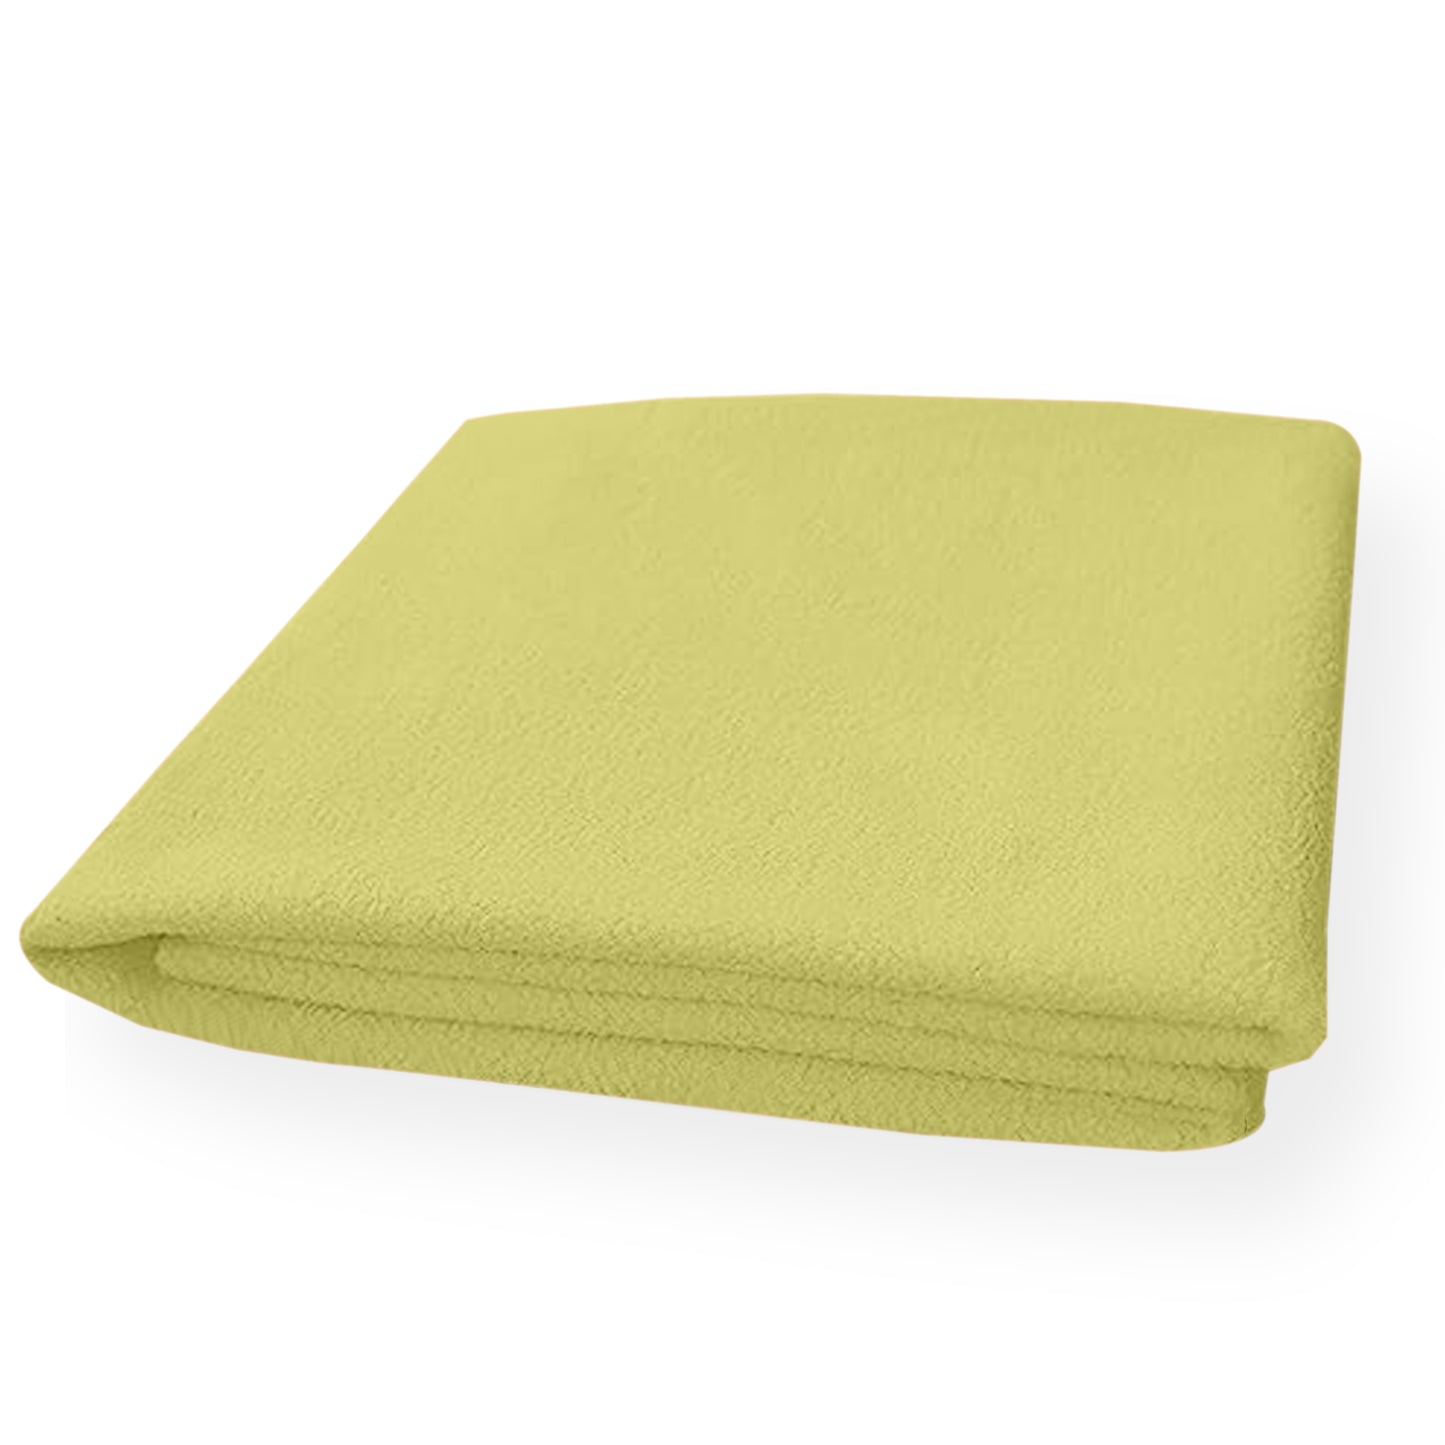 Waterproof Bed Protector, Quick Dry Sheet, Baby Bed Protector (70 X 100 CM), Pack of 1 -YELLOW